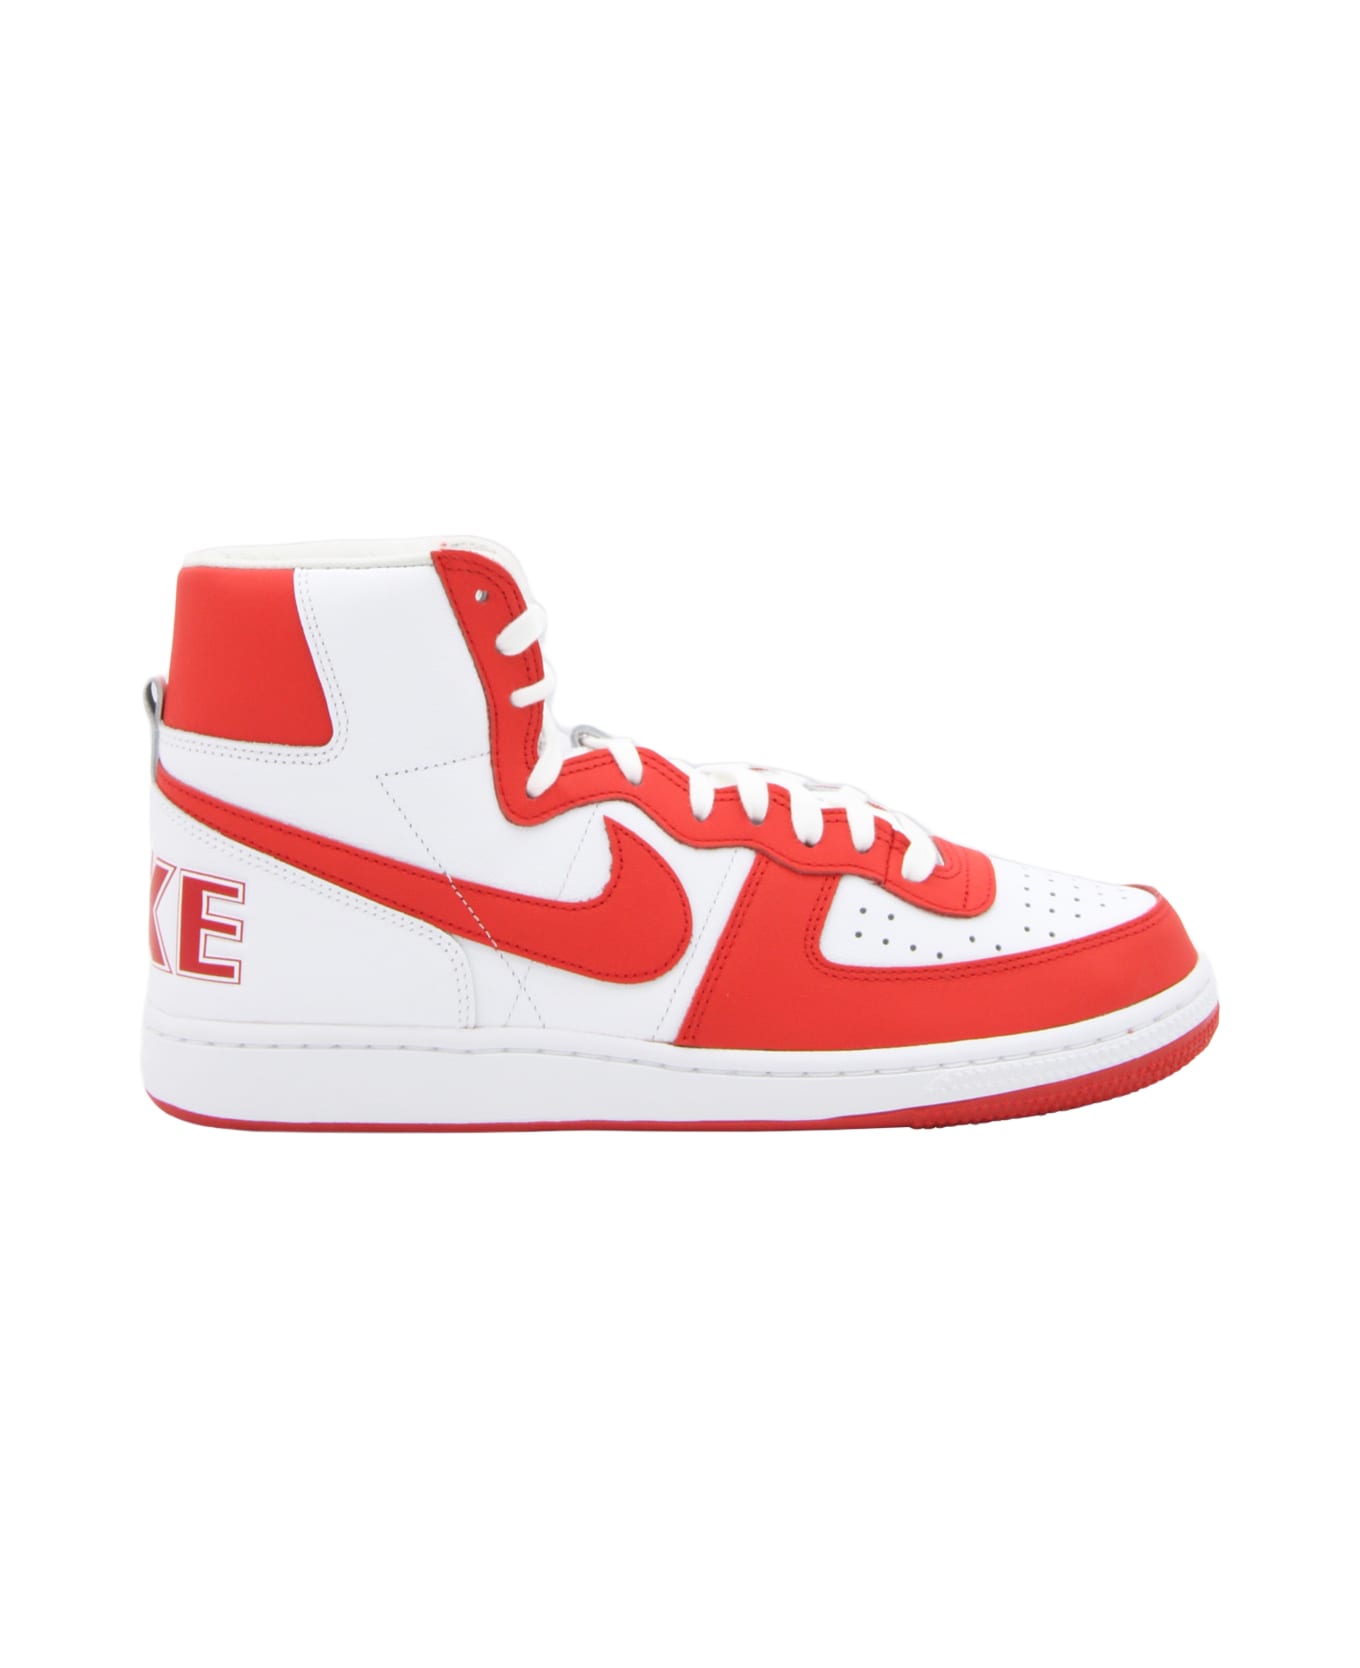 Comme des Garçons White And Red Leather Sneakers - Red